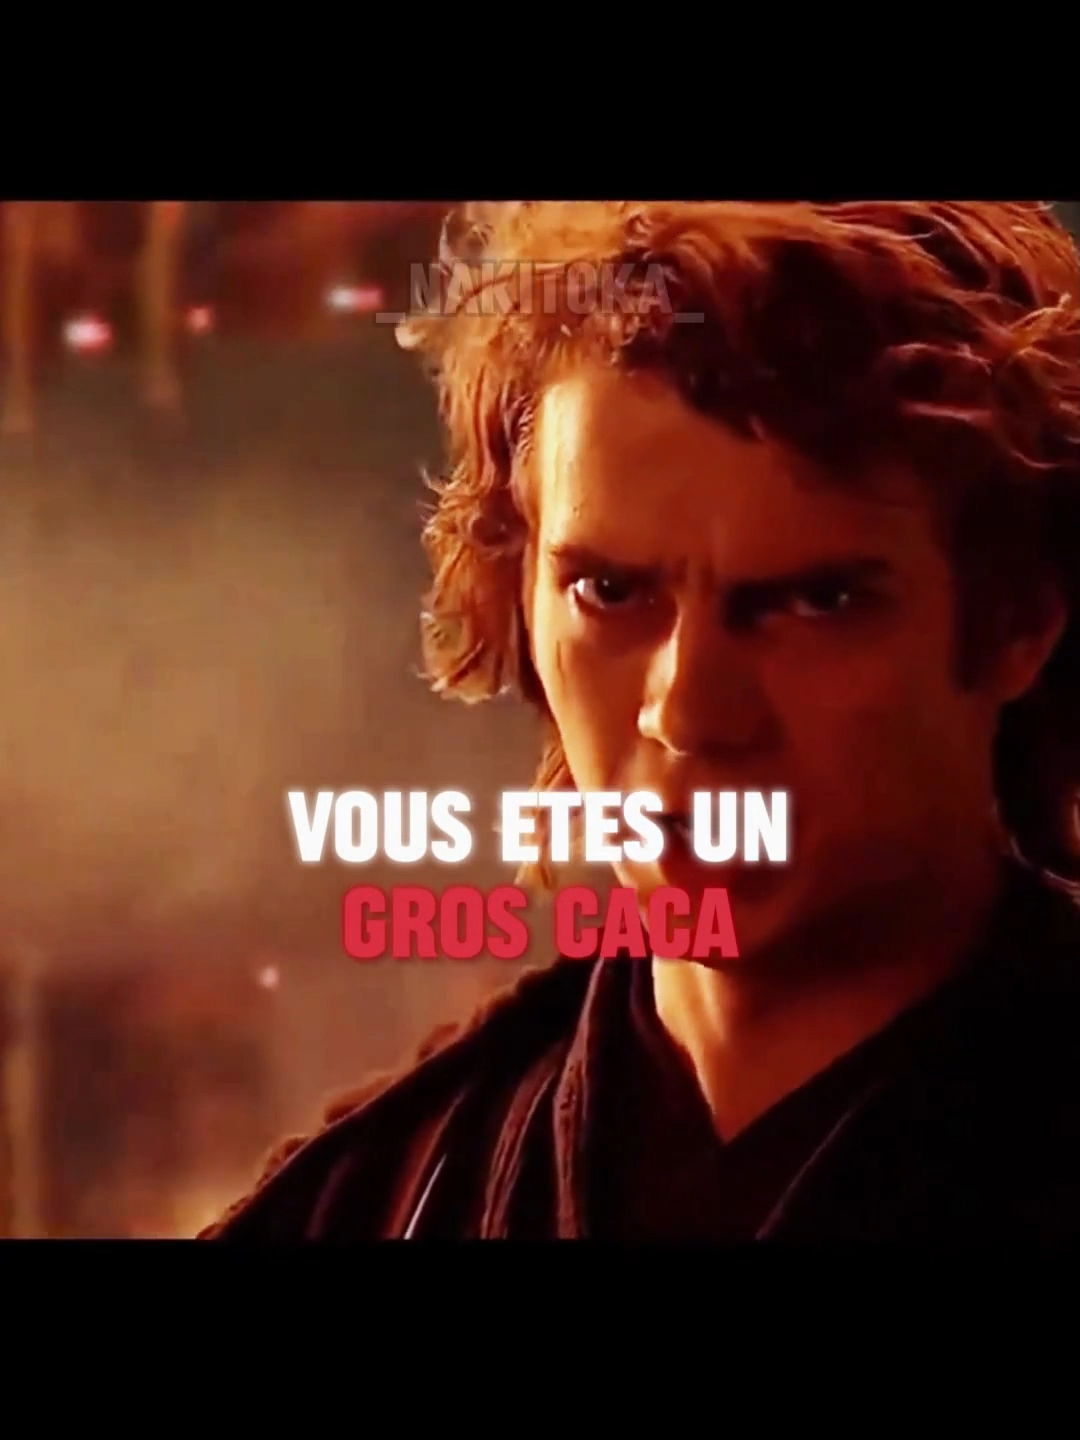 Brainrot caca wars star wars, l'IA a fauit des trucs chelous par moments mais oklm #starwars #starwarsedit #caca #drole #humour #cacaedit #fyp #fypシ゚ #pourtoi #fy #whippin #brainrot